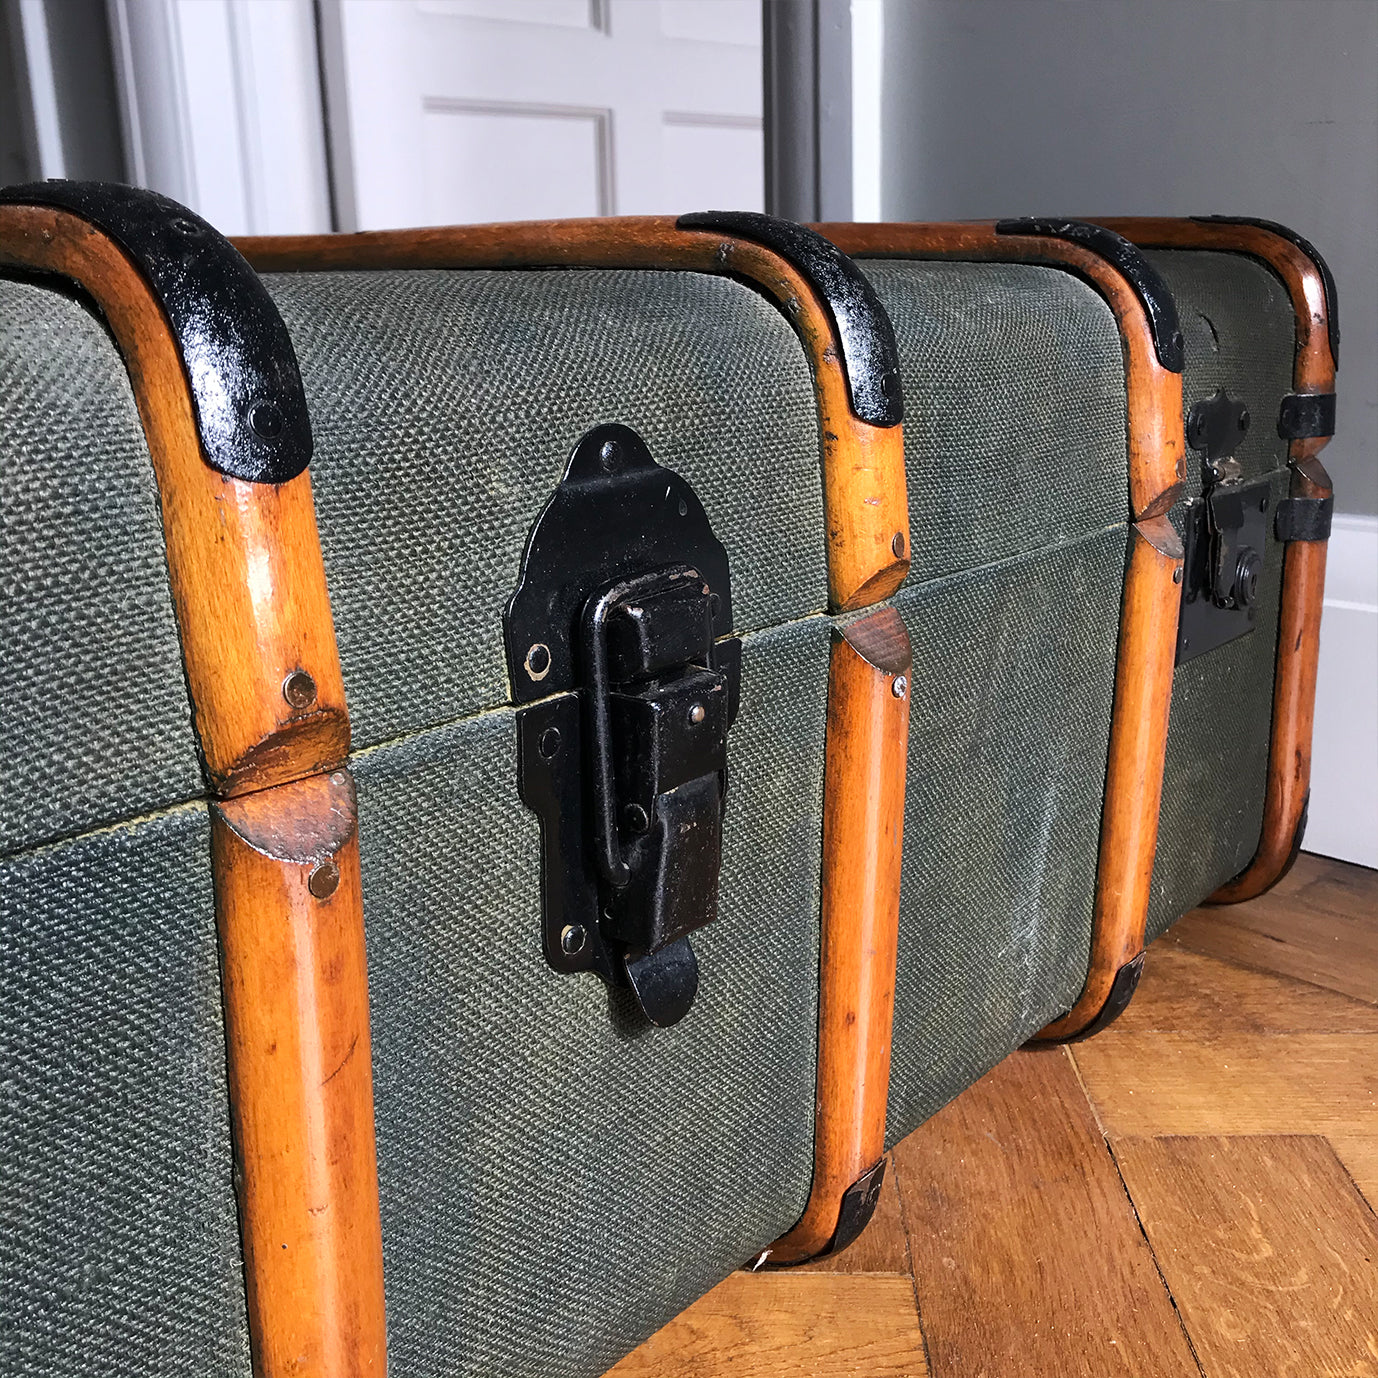 Good looking Edwardian Steamer Trunk in fantastic condition. Finished in a green applied hessian with beautifully rich bent wood straps. It has two lockable latches with a key, and a central main latch all finished in black. There are two thick leather carry handles on each end - SHOP NOW - www.intovintage.co.uk